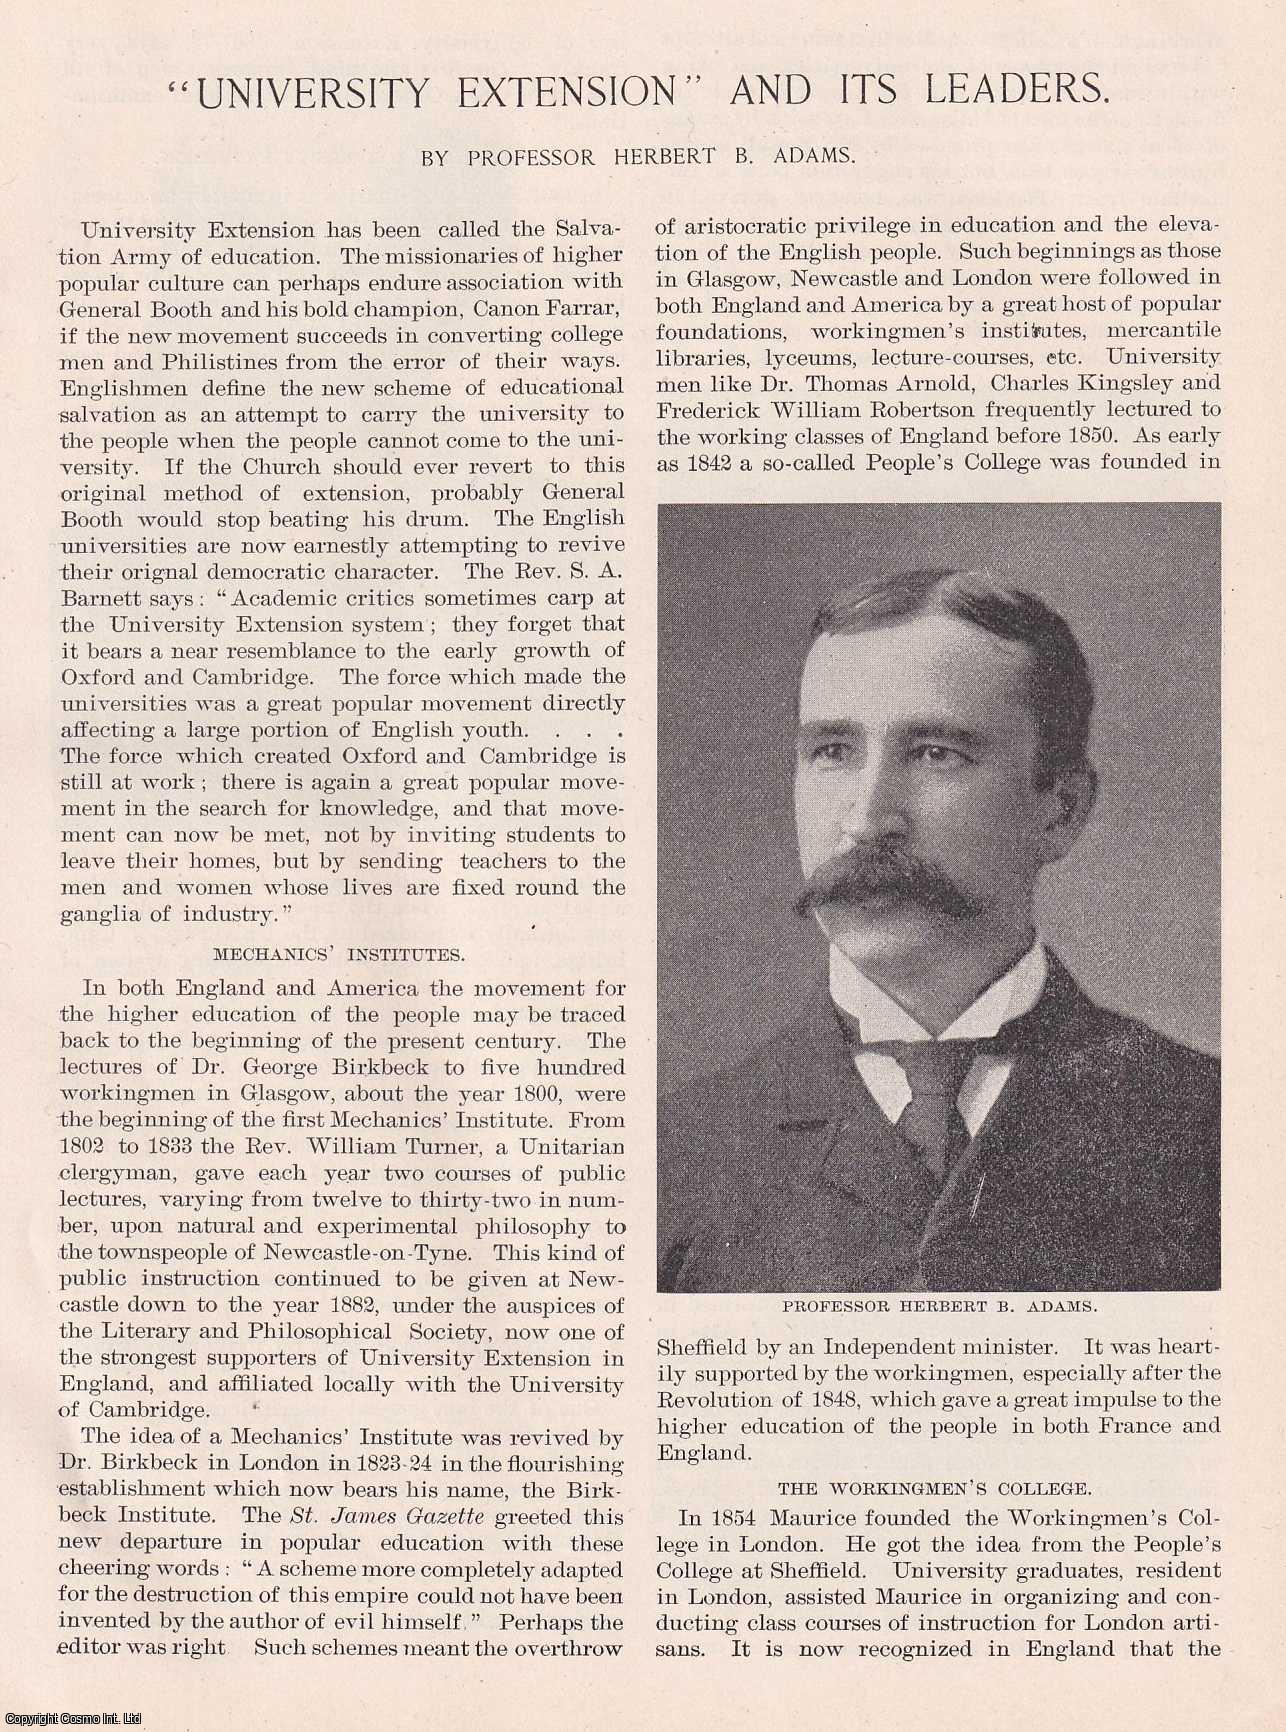 Prof. Herbert B. Adams - University Extension and Its Leaders. The popularisation of higher education. An original article from the American Review of Reviews, 1891.